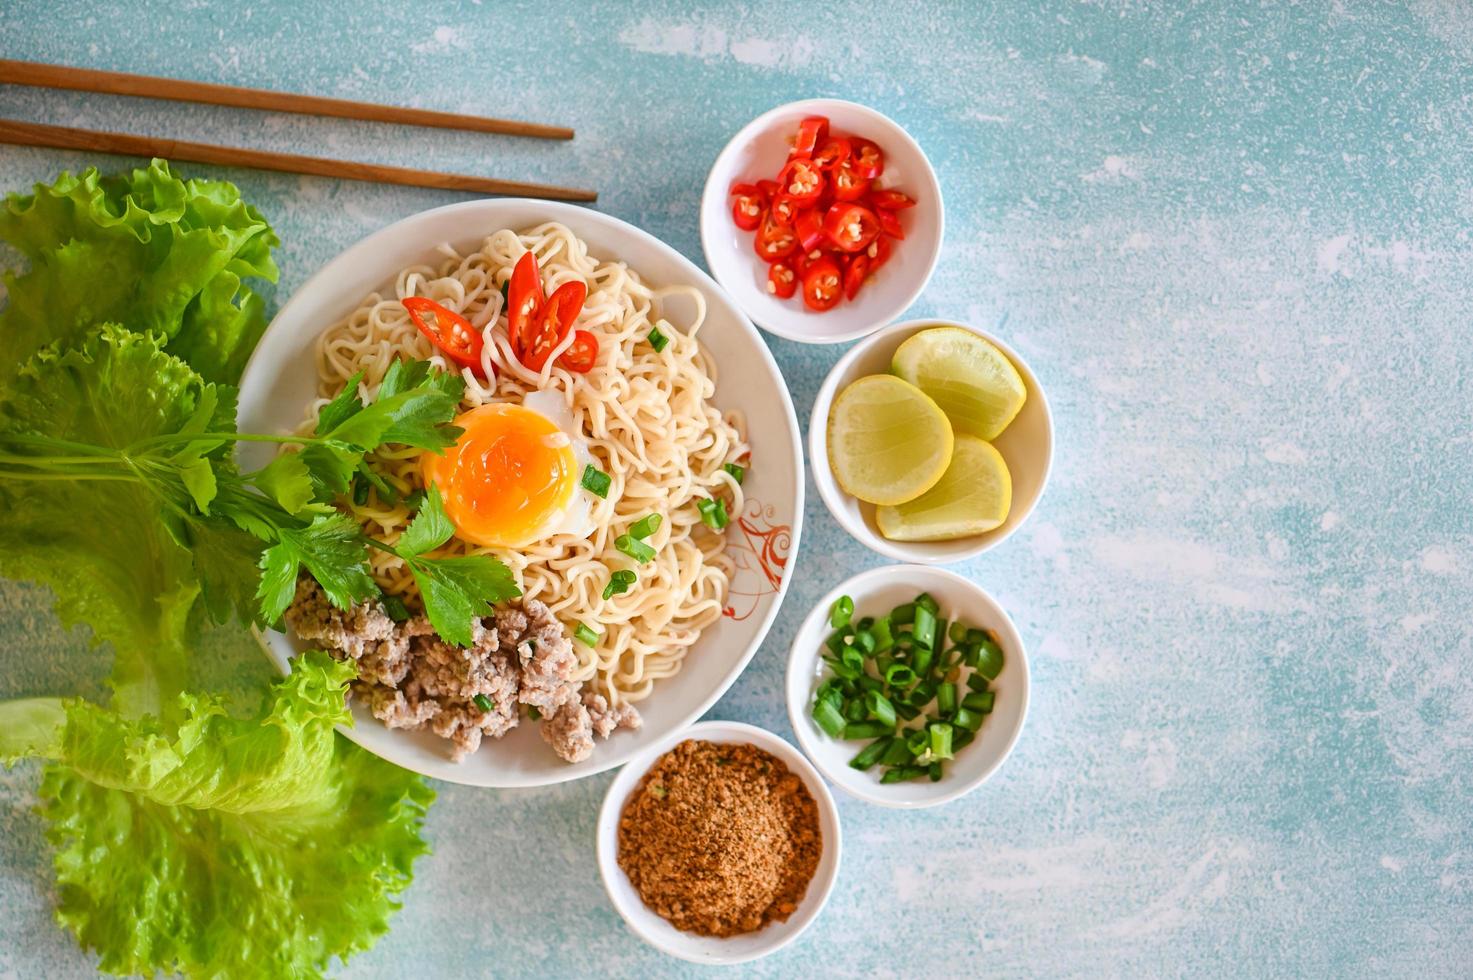 instant noodles cooking tasty eating with plate, noodles bowl with boiled egg minced pork vegetable spring onion lemon lime lettuce celery and chili on table food, noodle soup photo